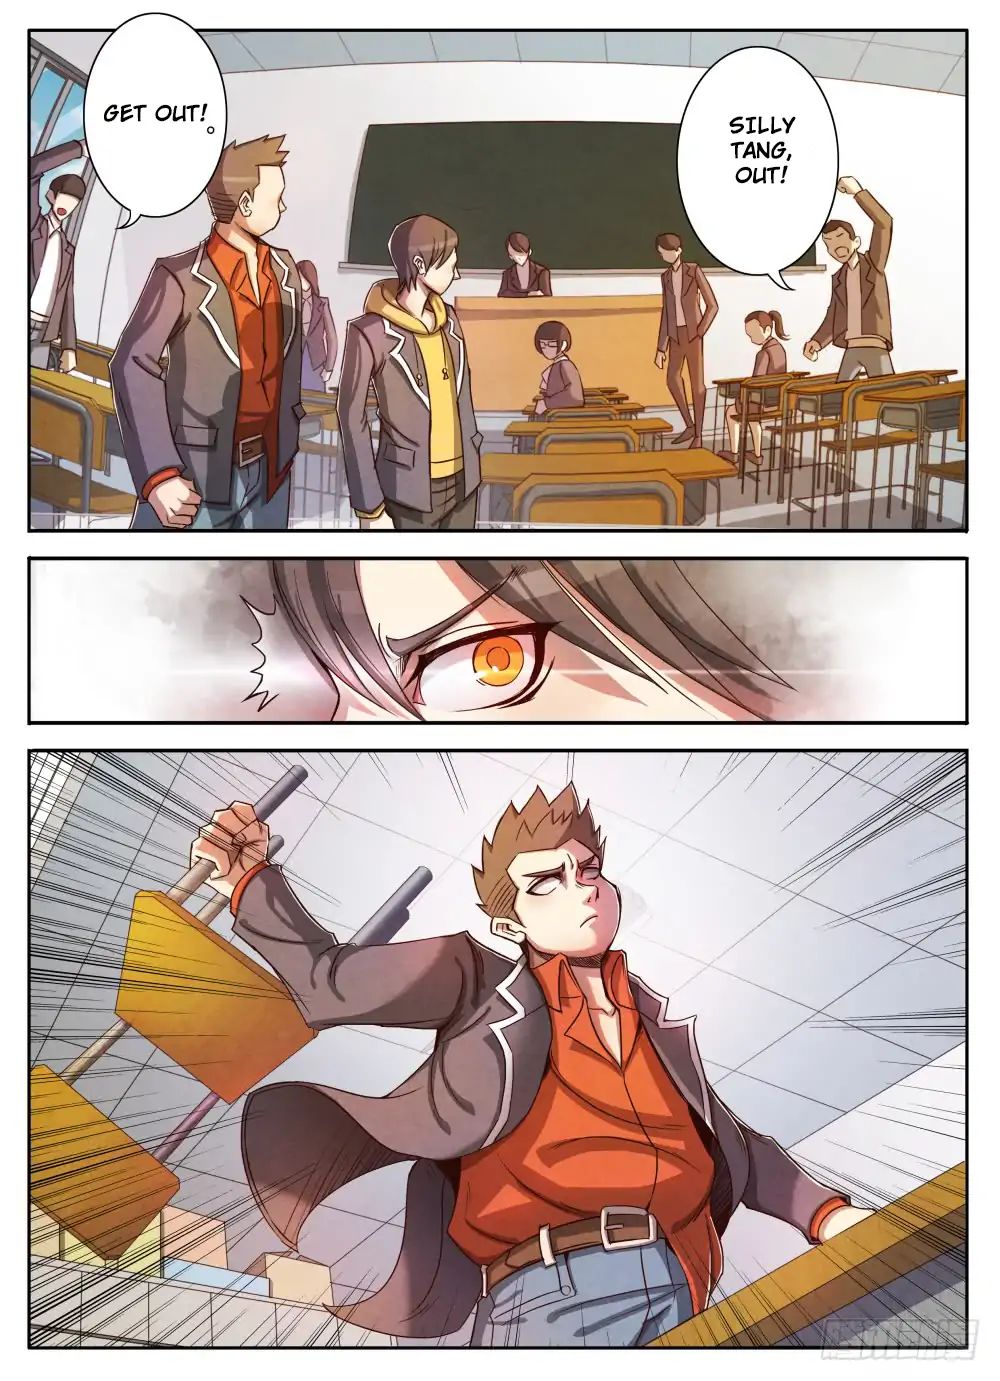 Return From the World of Immortals Vol.1 Chapter 3: Back to school